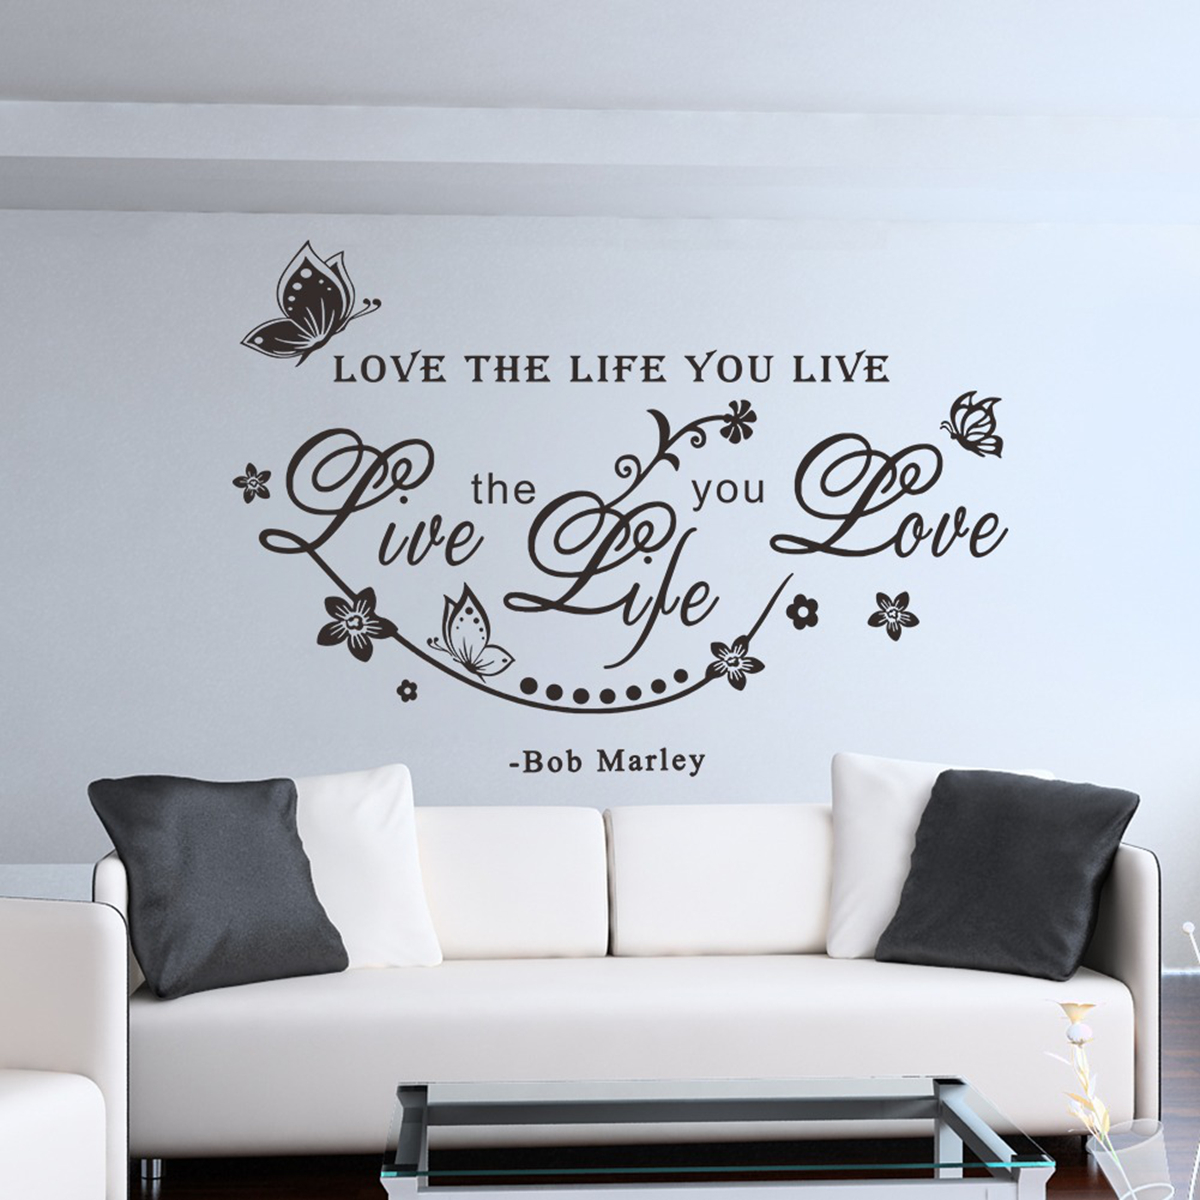 Love The Life You Live - HD Wallpaper 